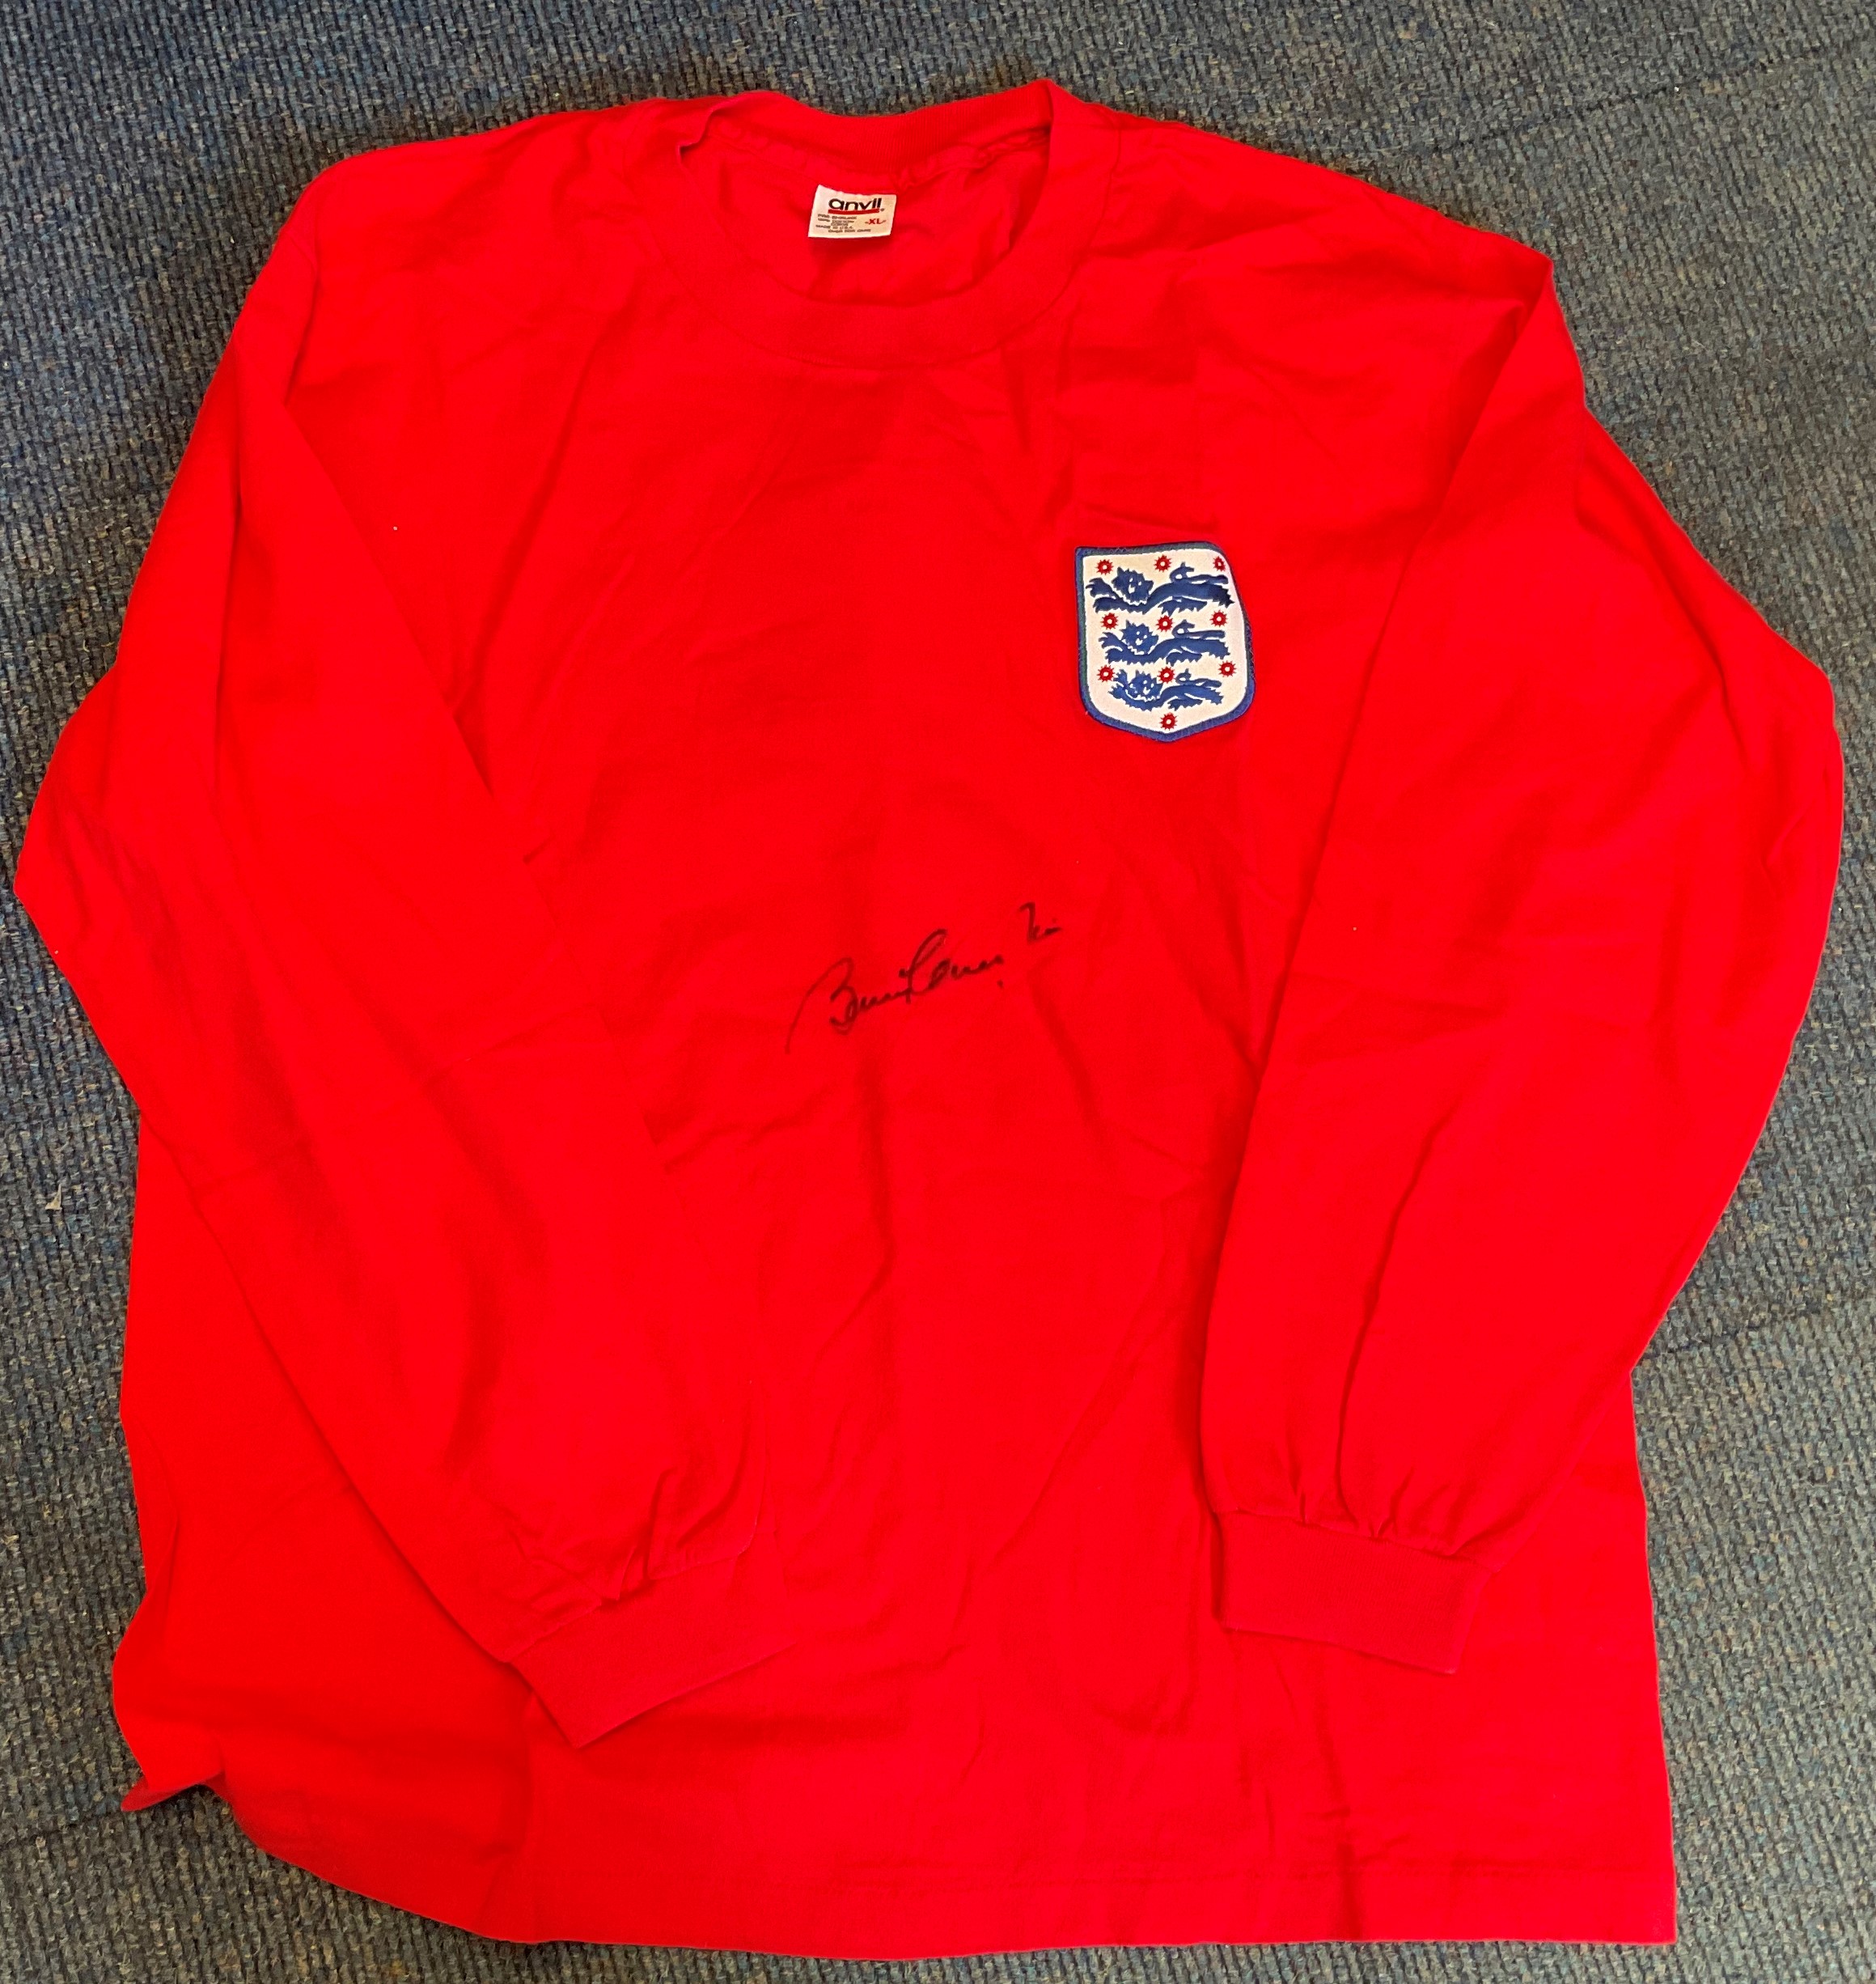 Football Bobby Charlton signed England 1966 retro shirt. Good condition. All autographs come with